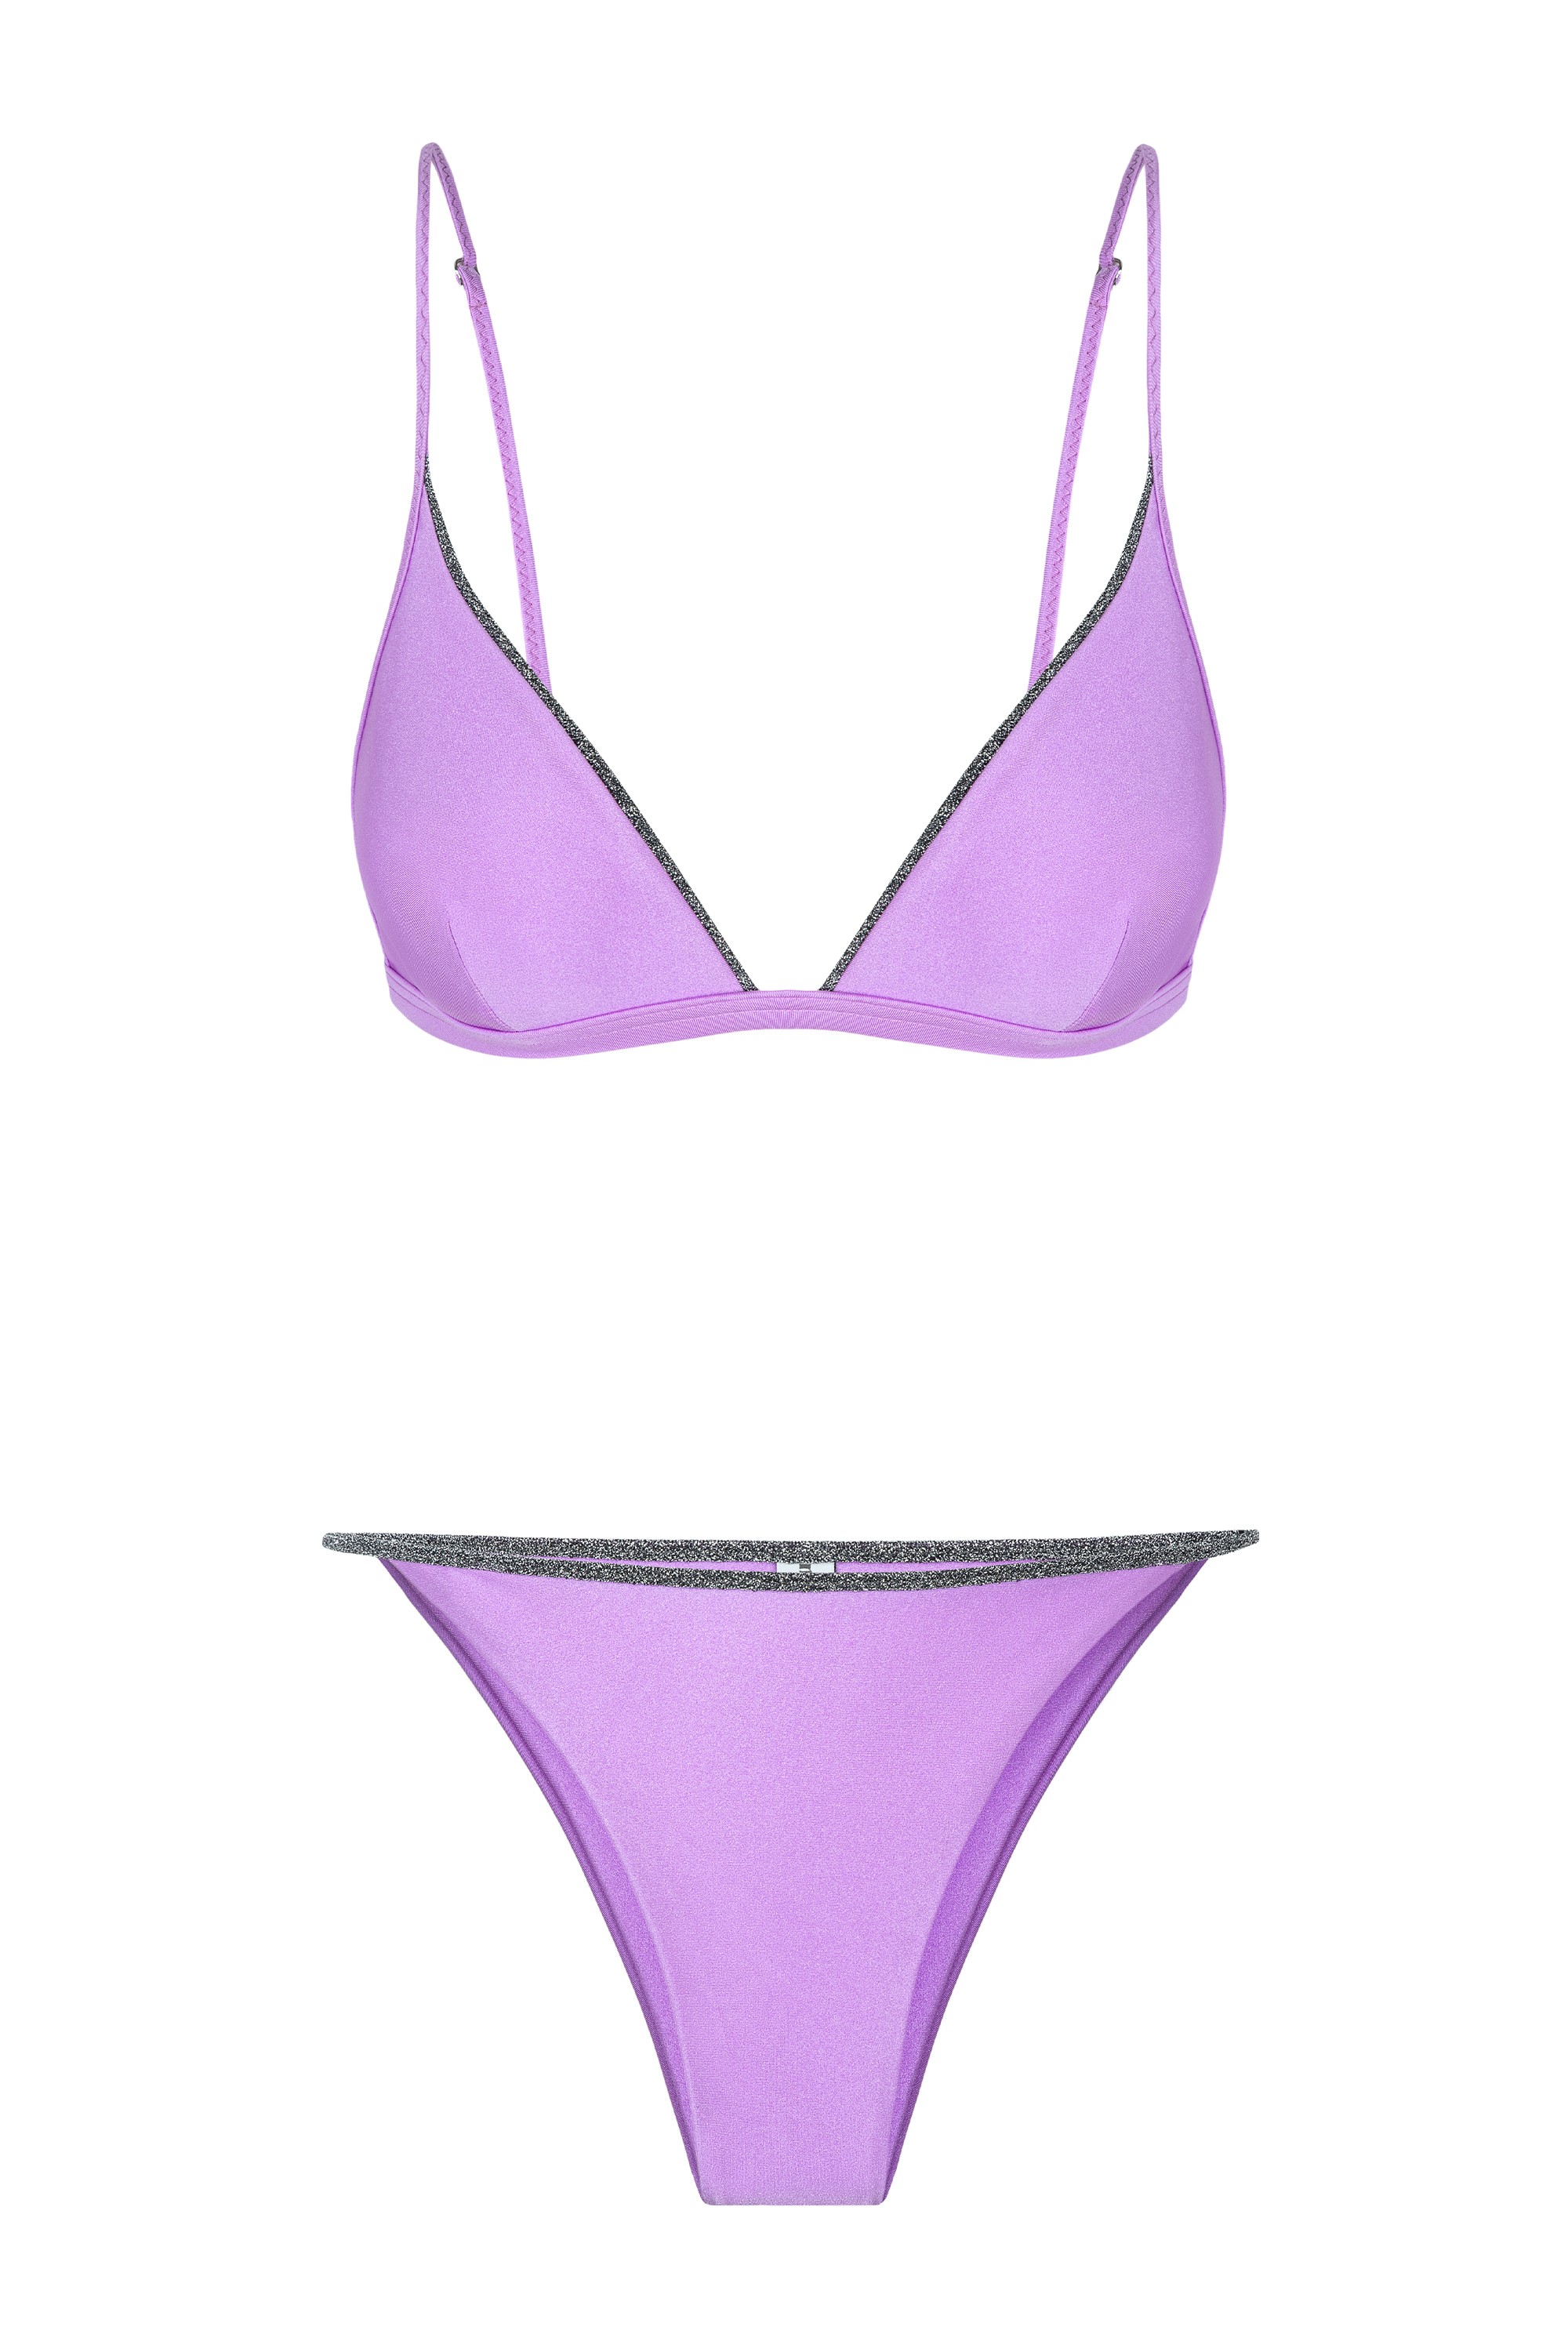               Vera two-piece swimsuit, lilac/silver